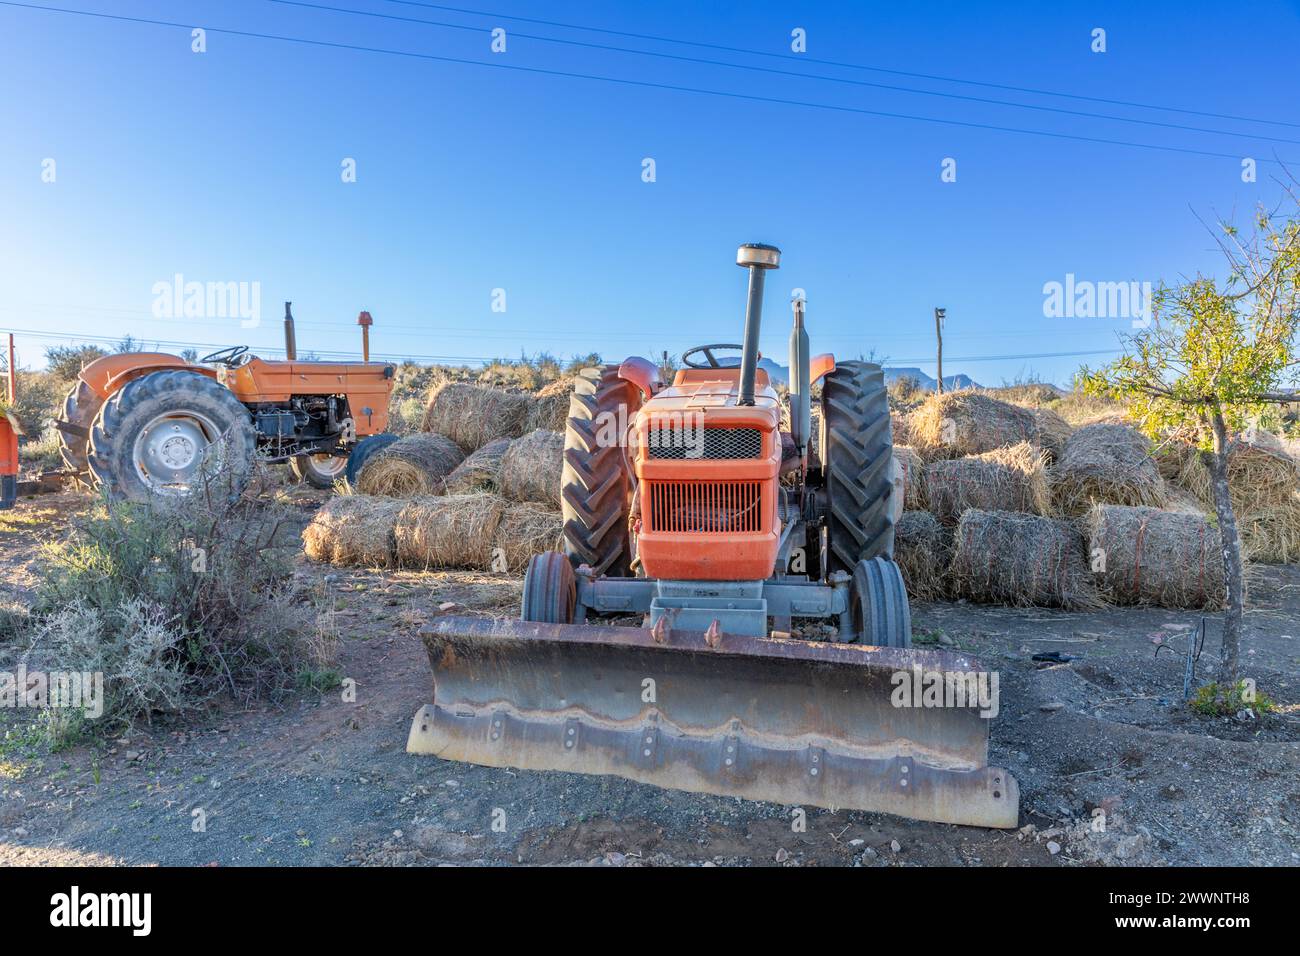 Rural farm landscape with tractors and rolled hay bales stacked behind one of the tractors. Stock Photo